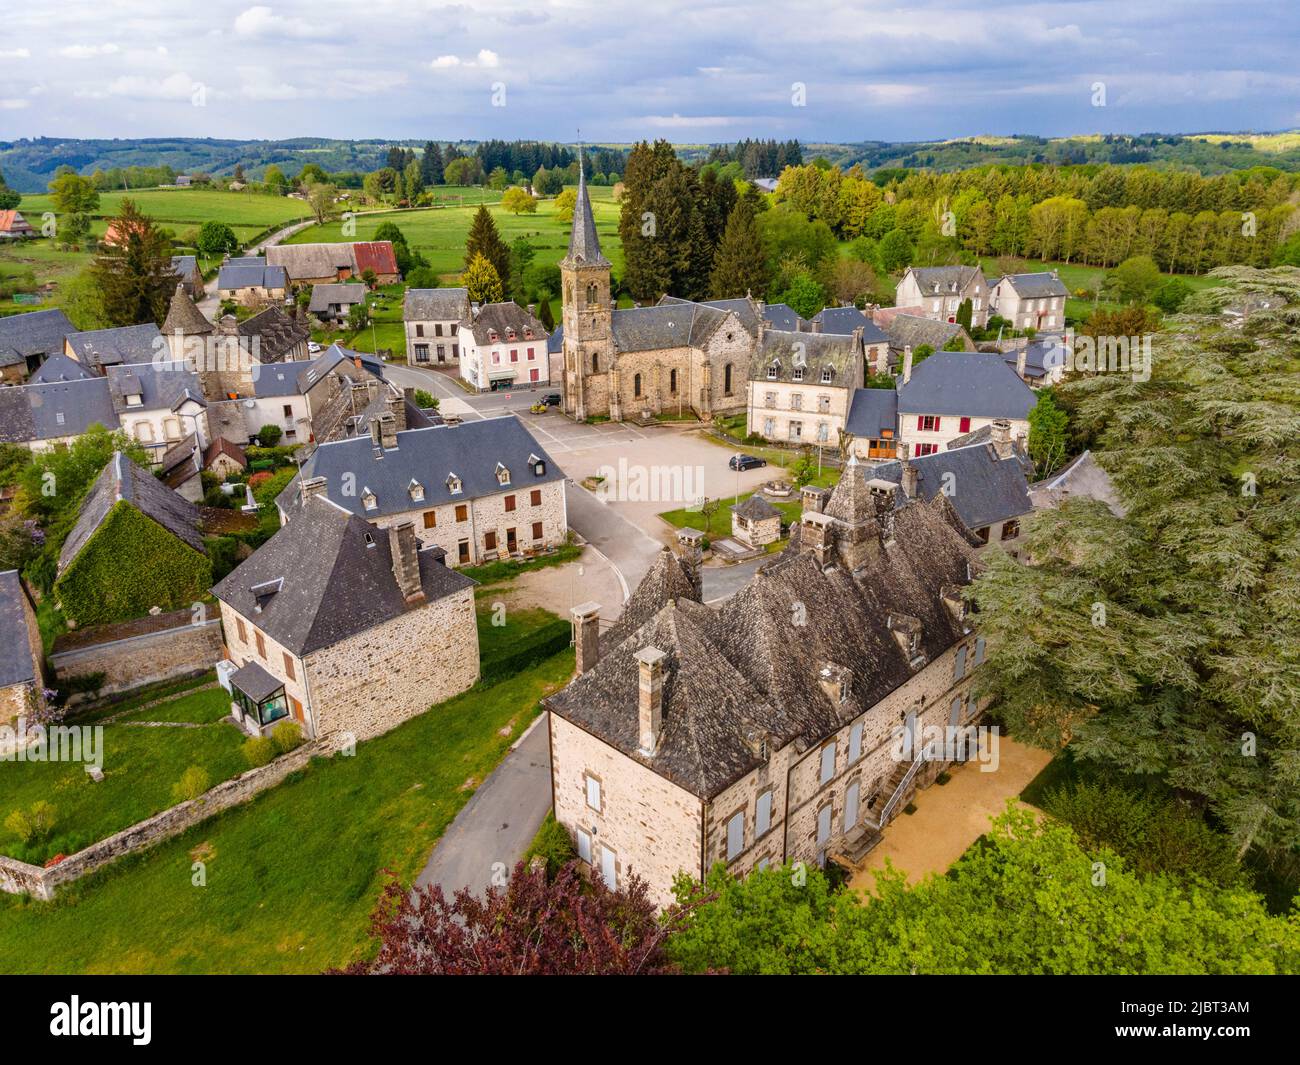 France, Correze, Lapleau, Rouby castle in the foreground, Dordogne valley (aerial view) Stock Photo